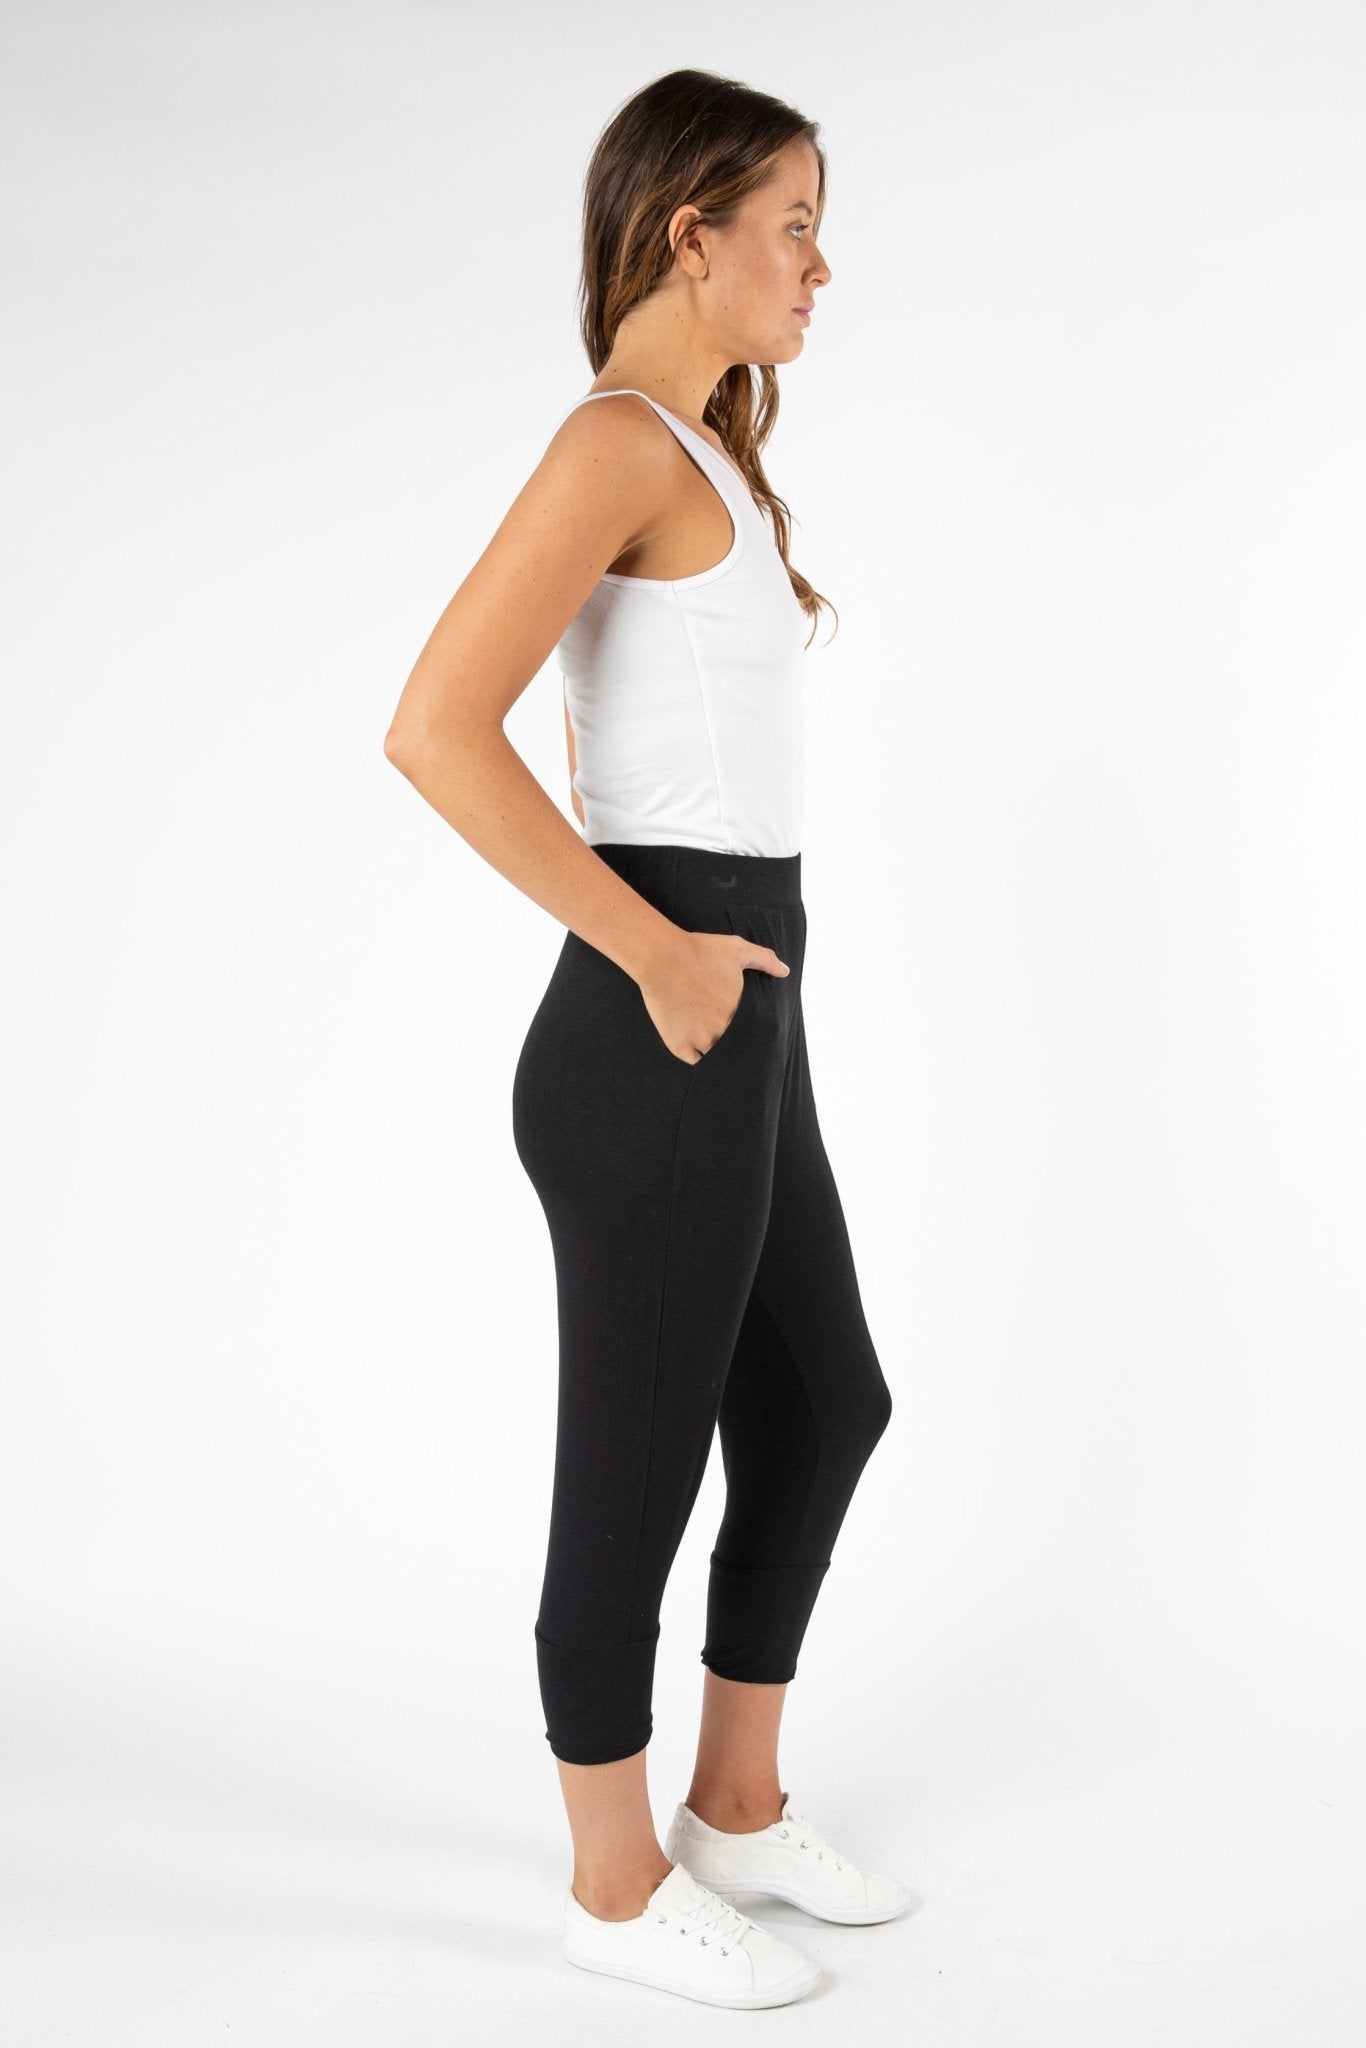 Betty Basics Lyon Pant in Black Size 8 or 10 Only - Hey Sara